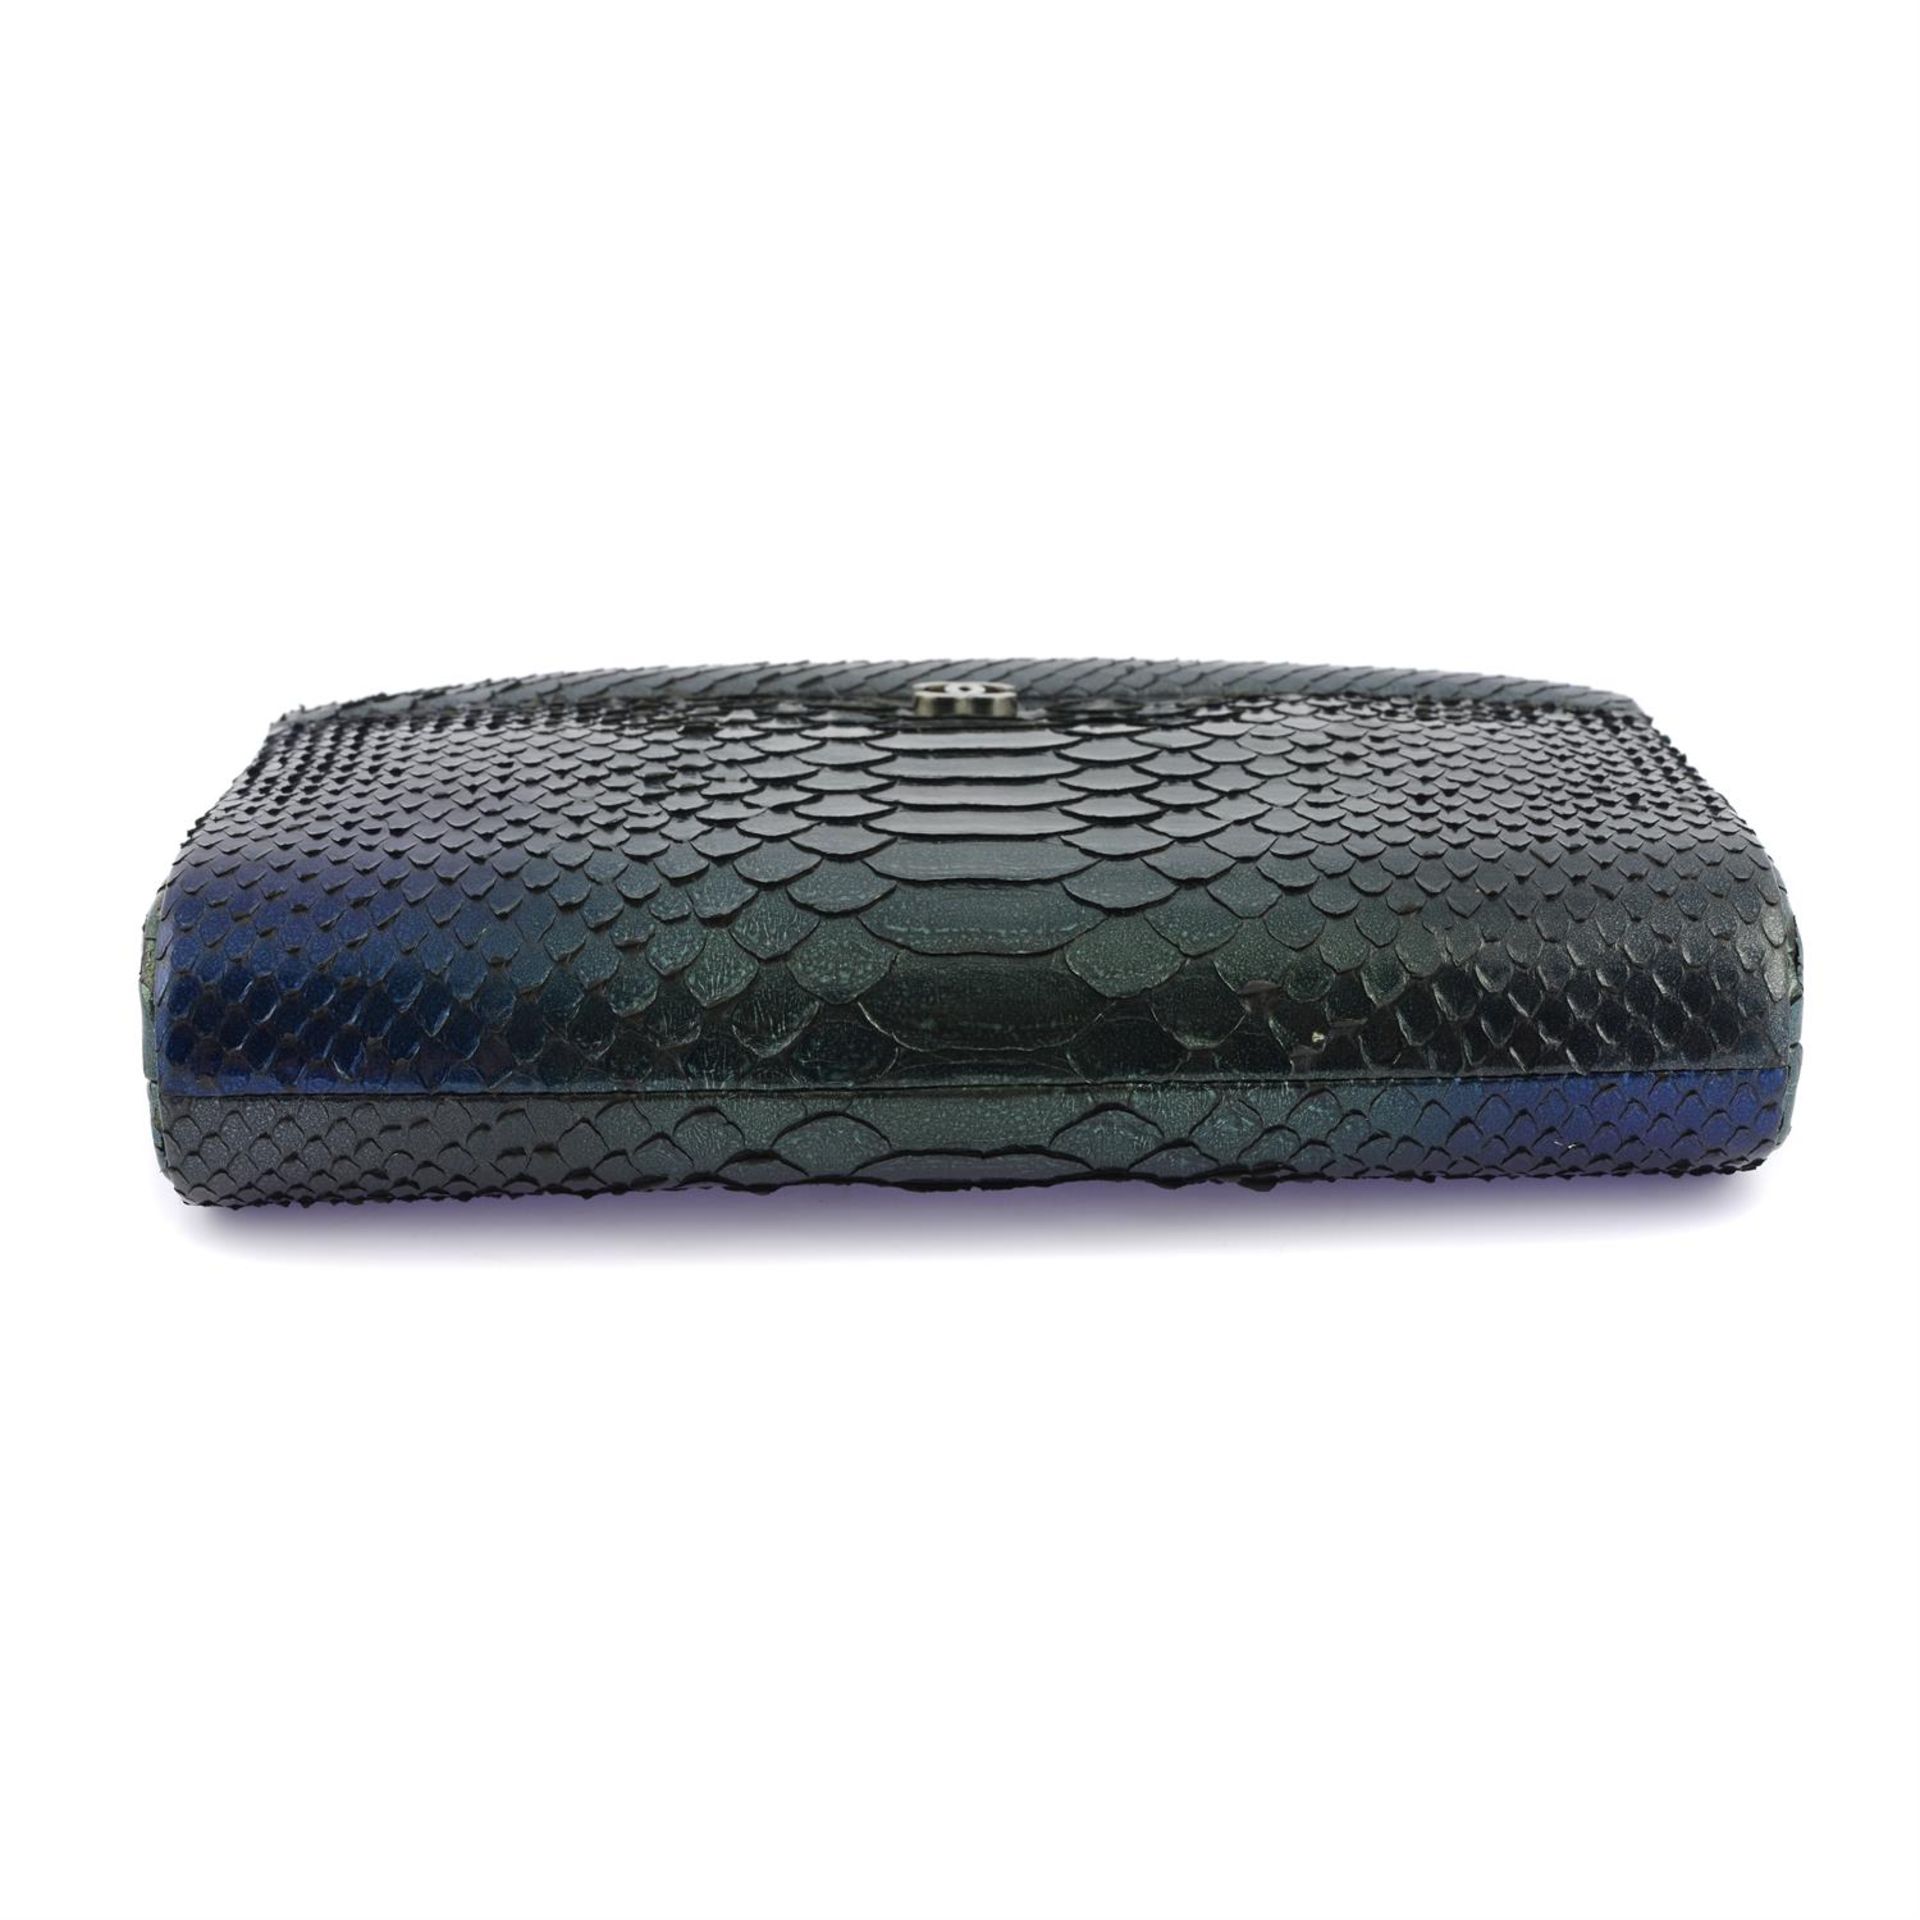 CHANEL - a green and blue gradient Python clutch. - Image 4 of 4